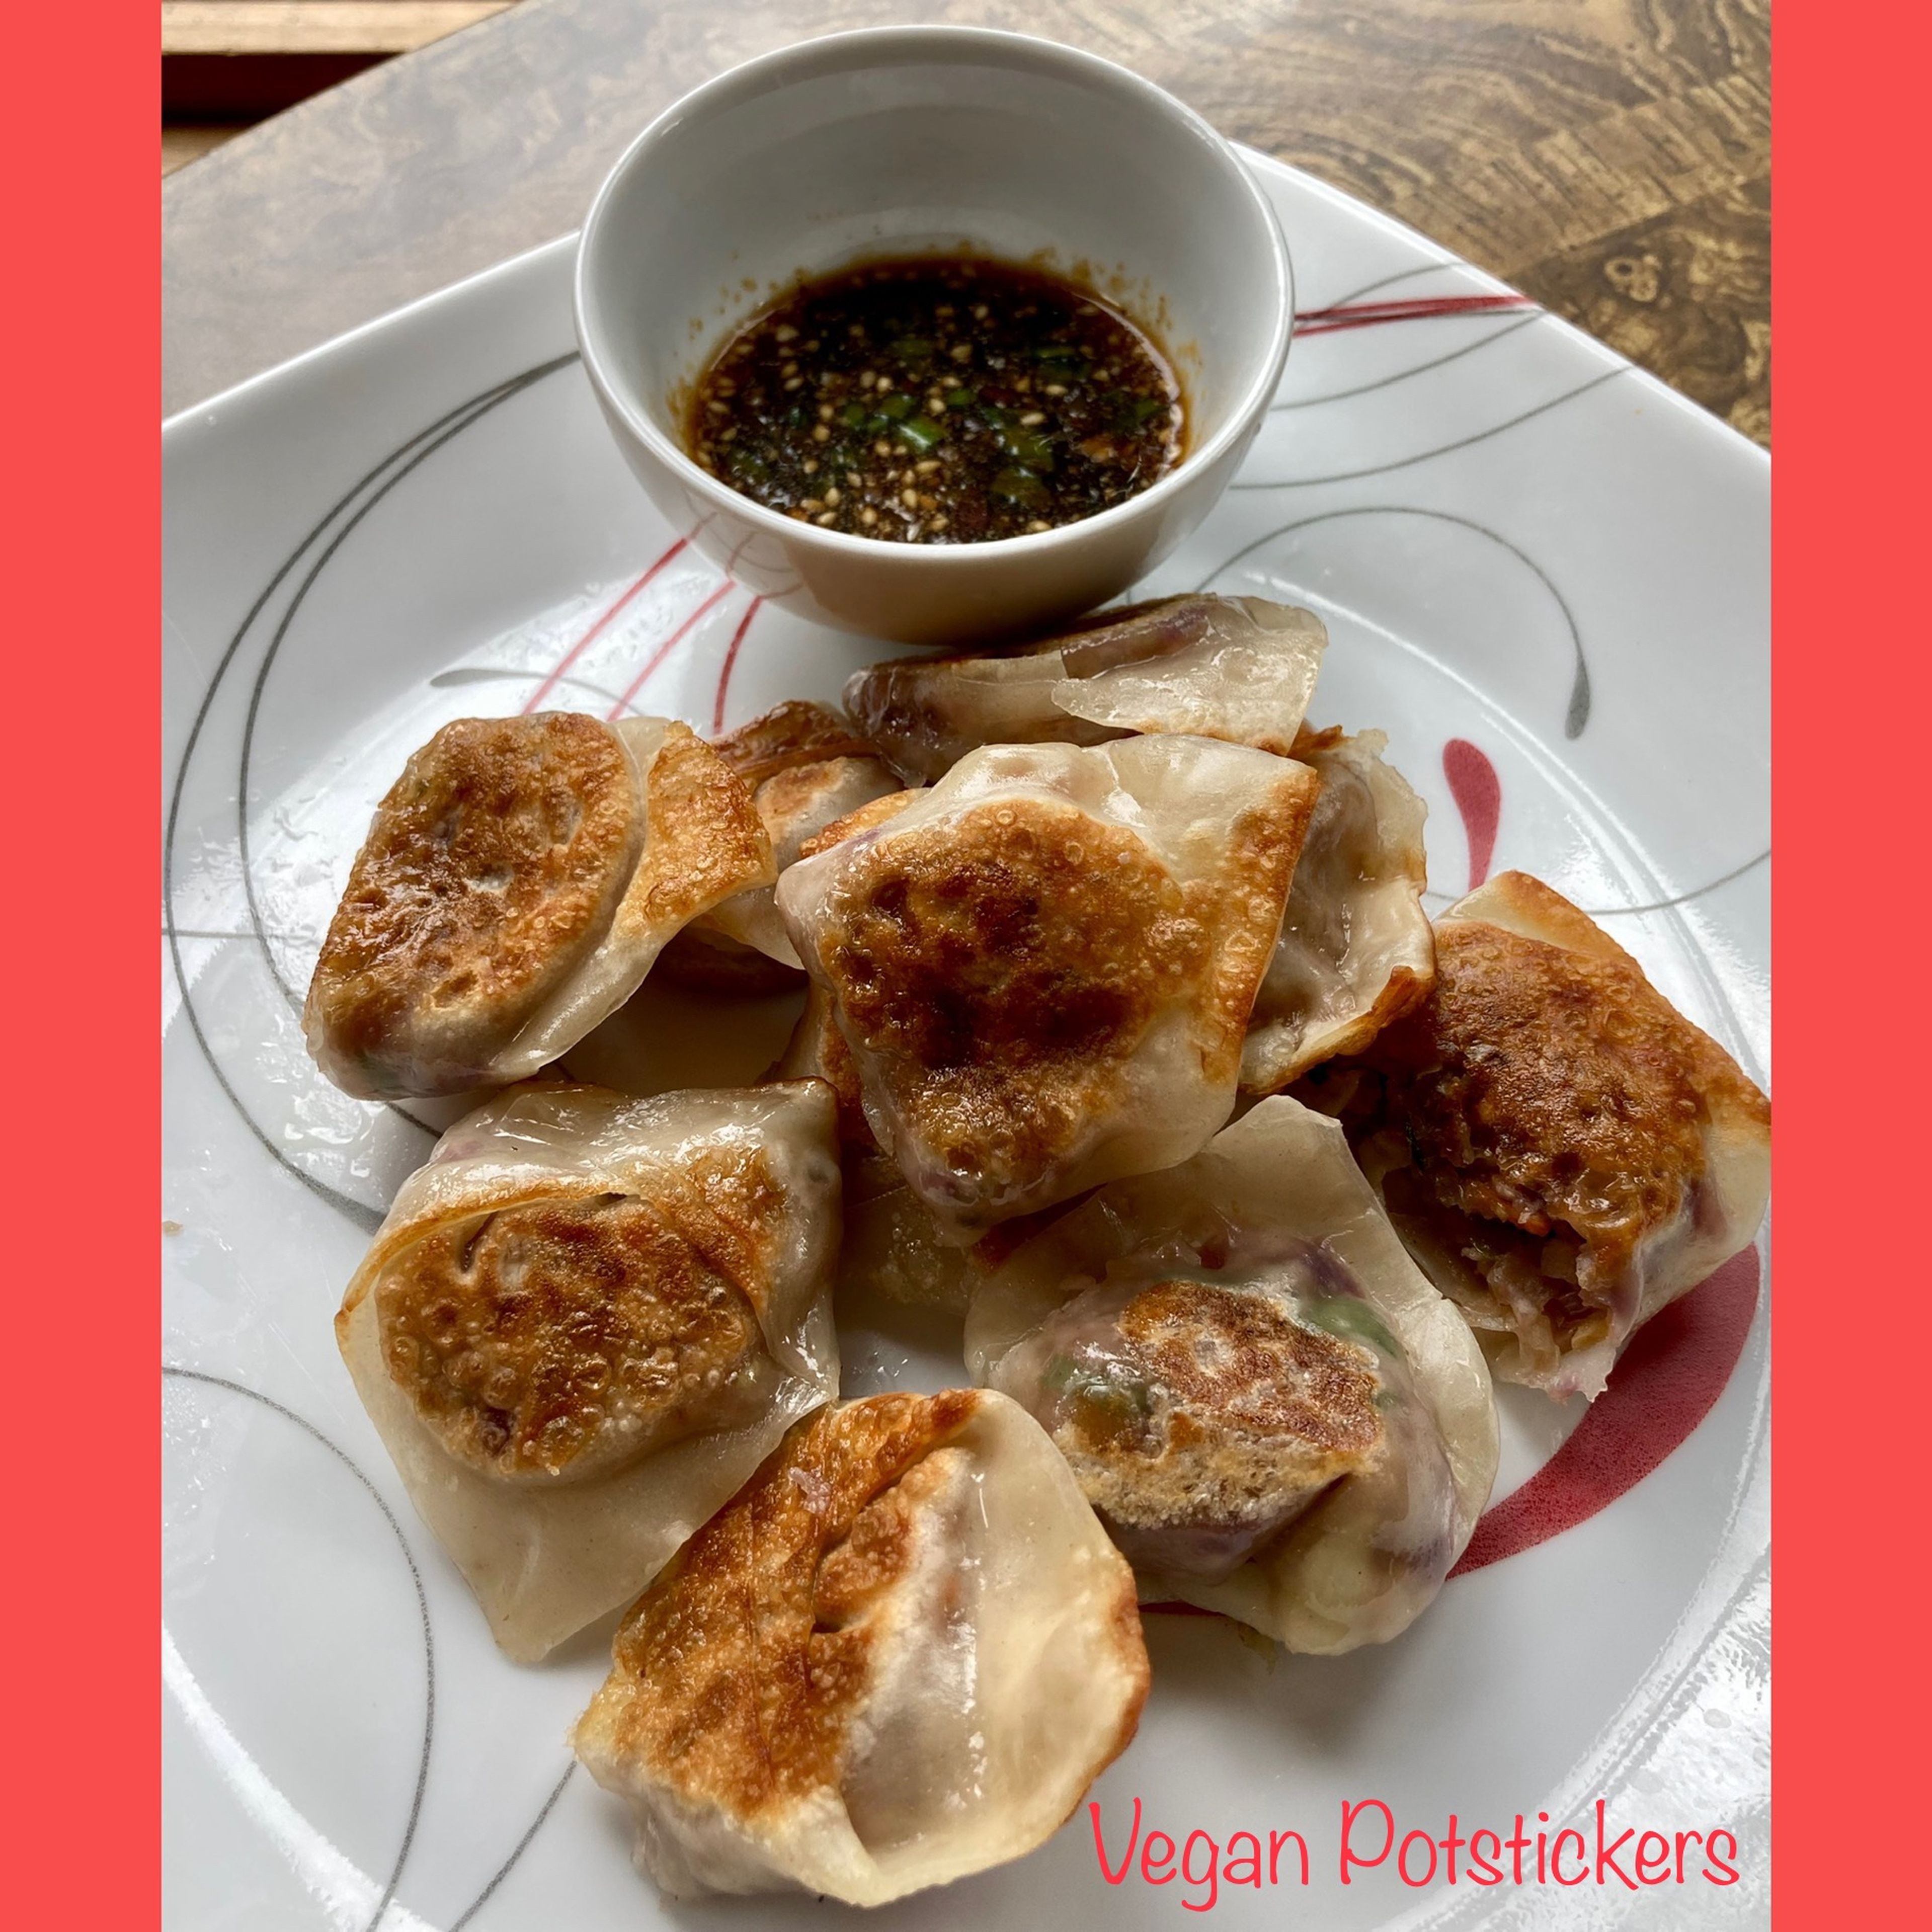 Vegan potstickers with dipping sauce